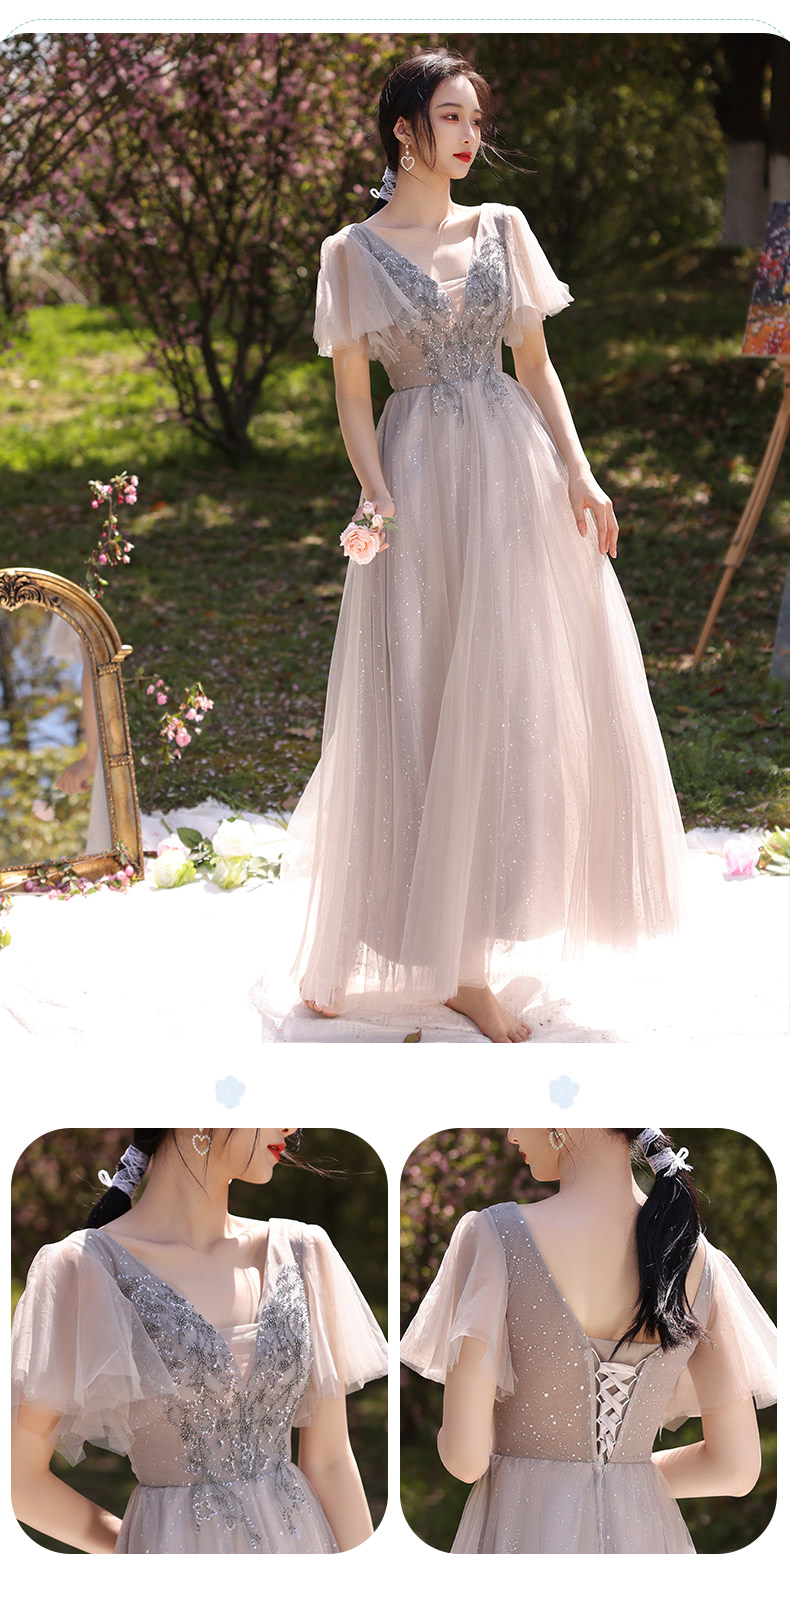 A-Line-Gray-Bridesmaid-Long-Dress-Lace-Floral-Embroidery-Party-Gown20.jpg